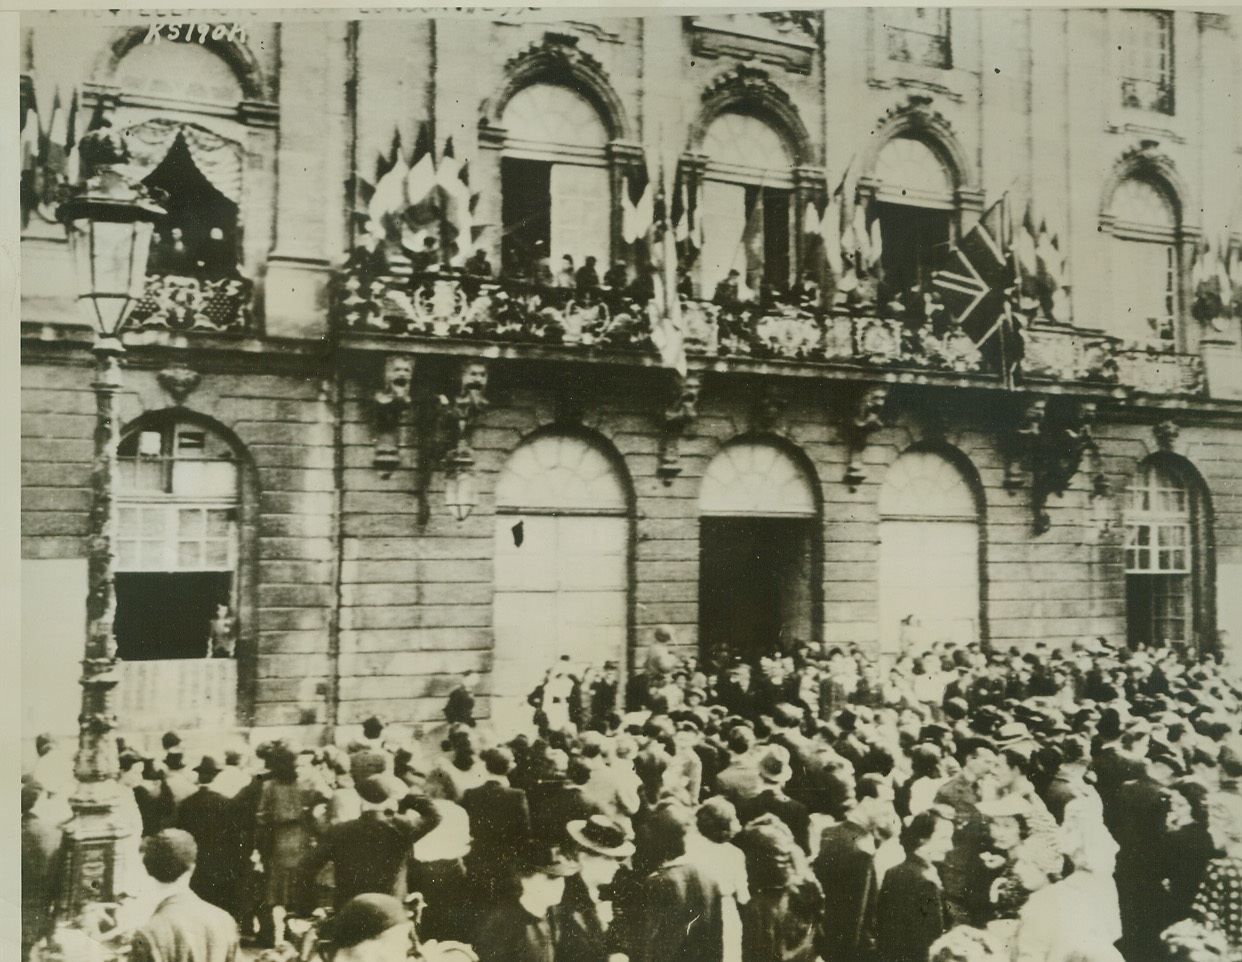 Nancy is Free!, 9/20/1944. Nancy, France—Allied flags wave aloft as citizens of Nancy crowd onto balconies and into the street in the public square to join in the celebration of Nancy’s liberation by the Allies. Credit: Signal Corps radiotelephoto from ACME;